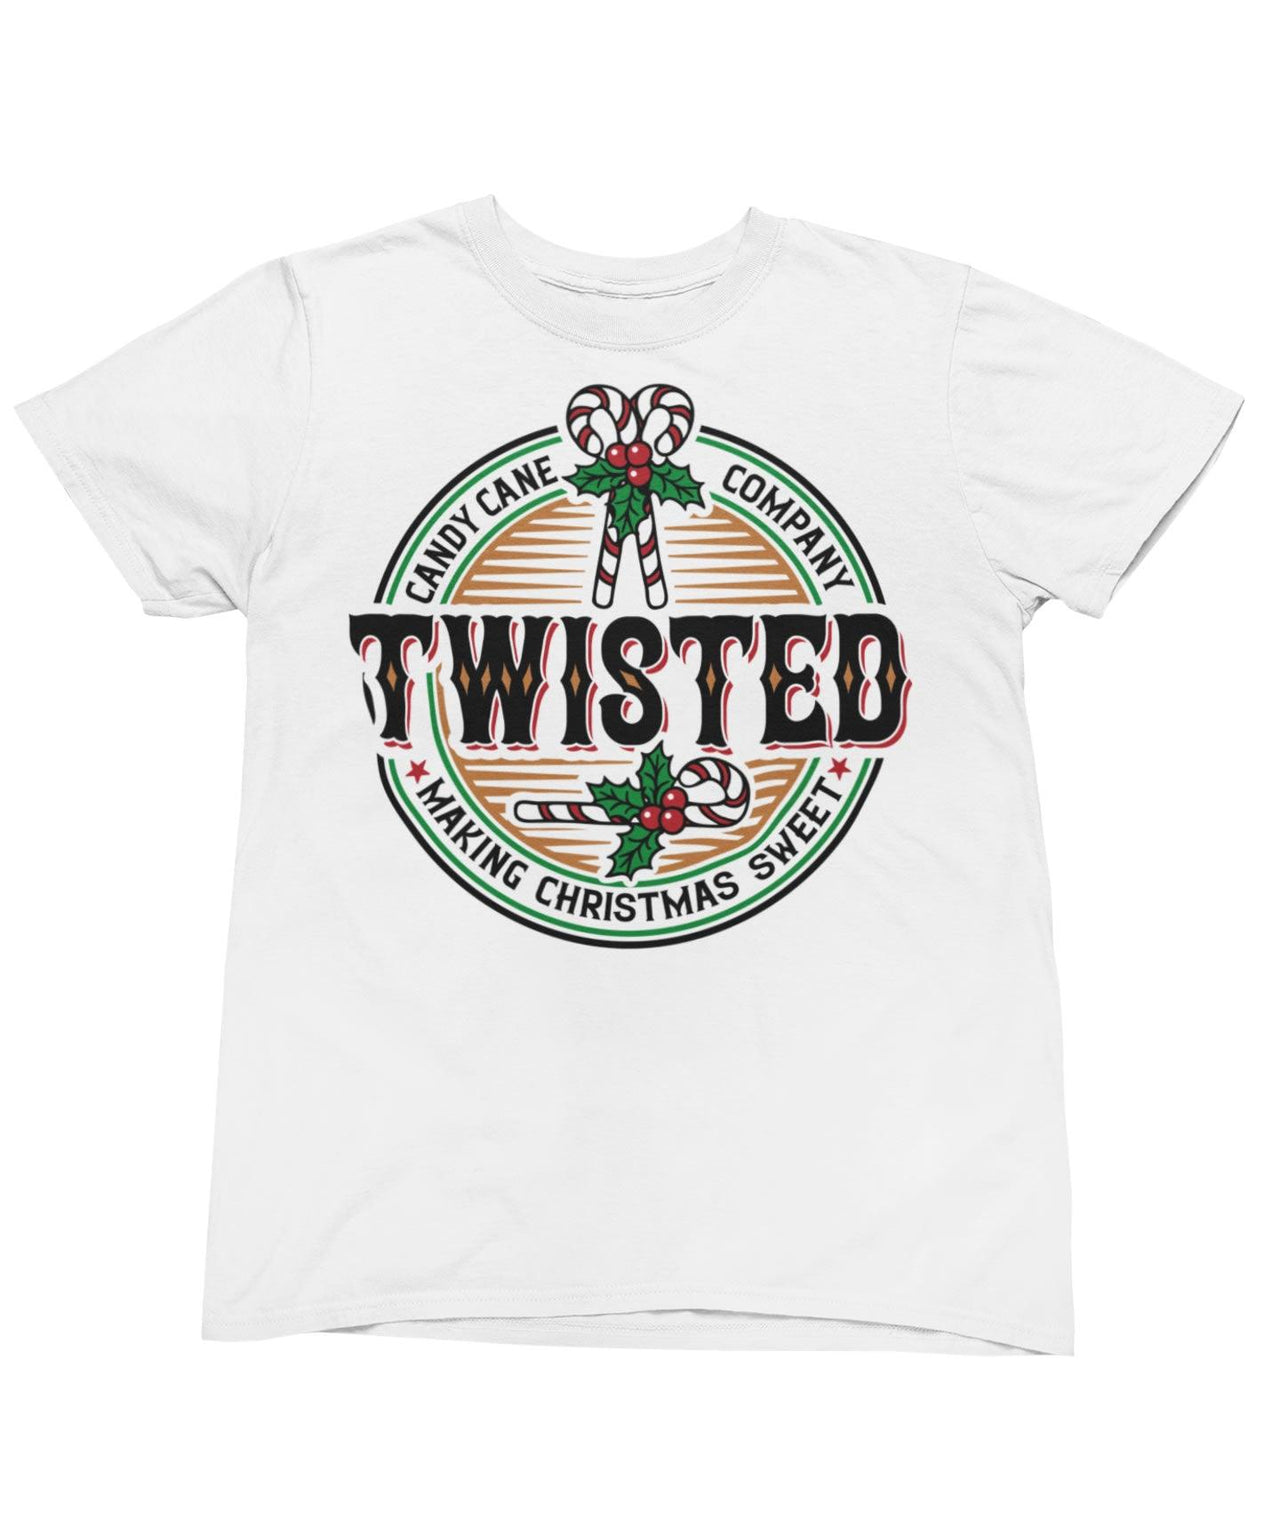 Twisted Candy Canes Christmas Unisex Mens T-Shirt 8Ball